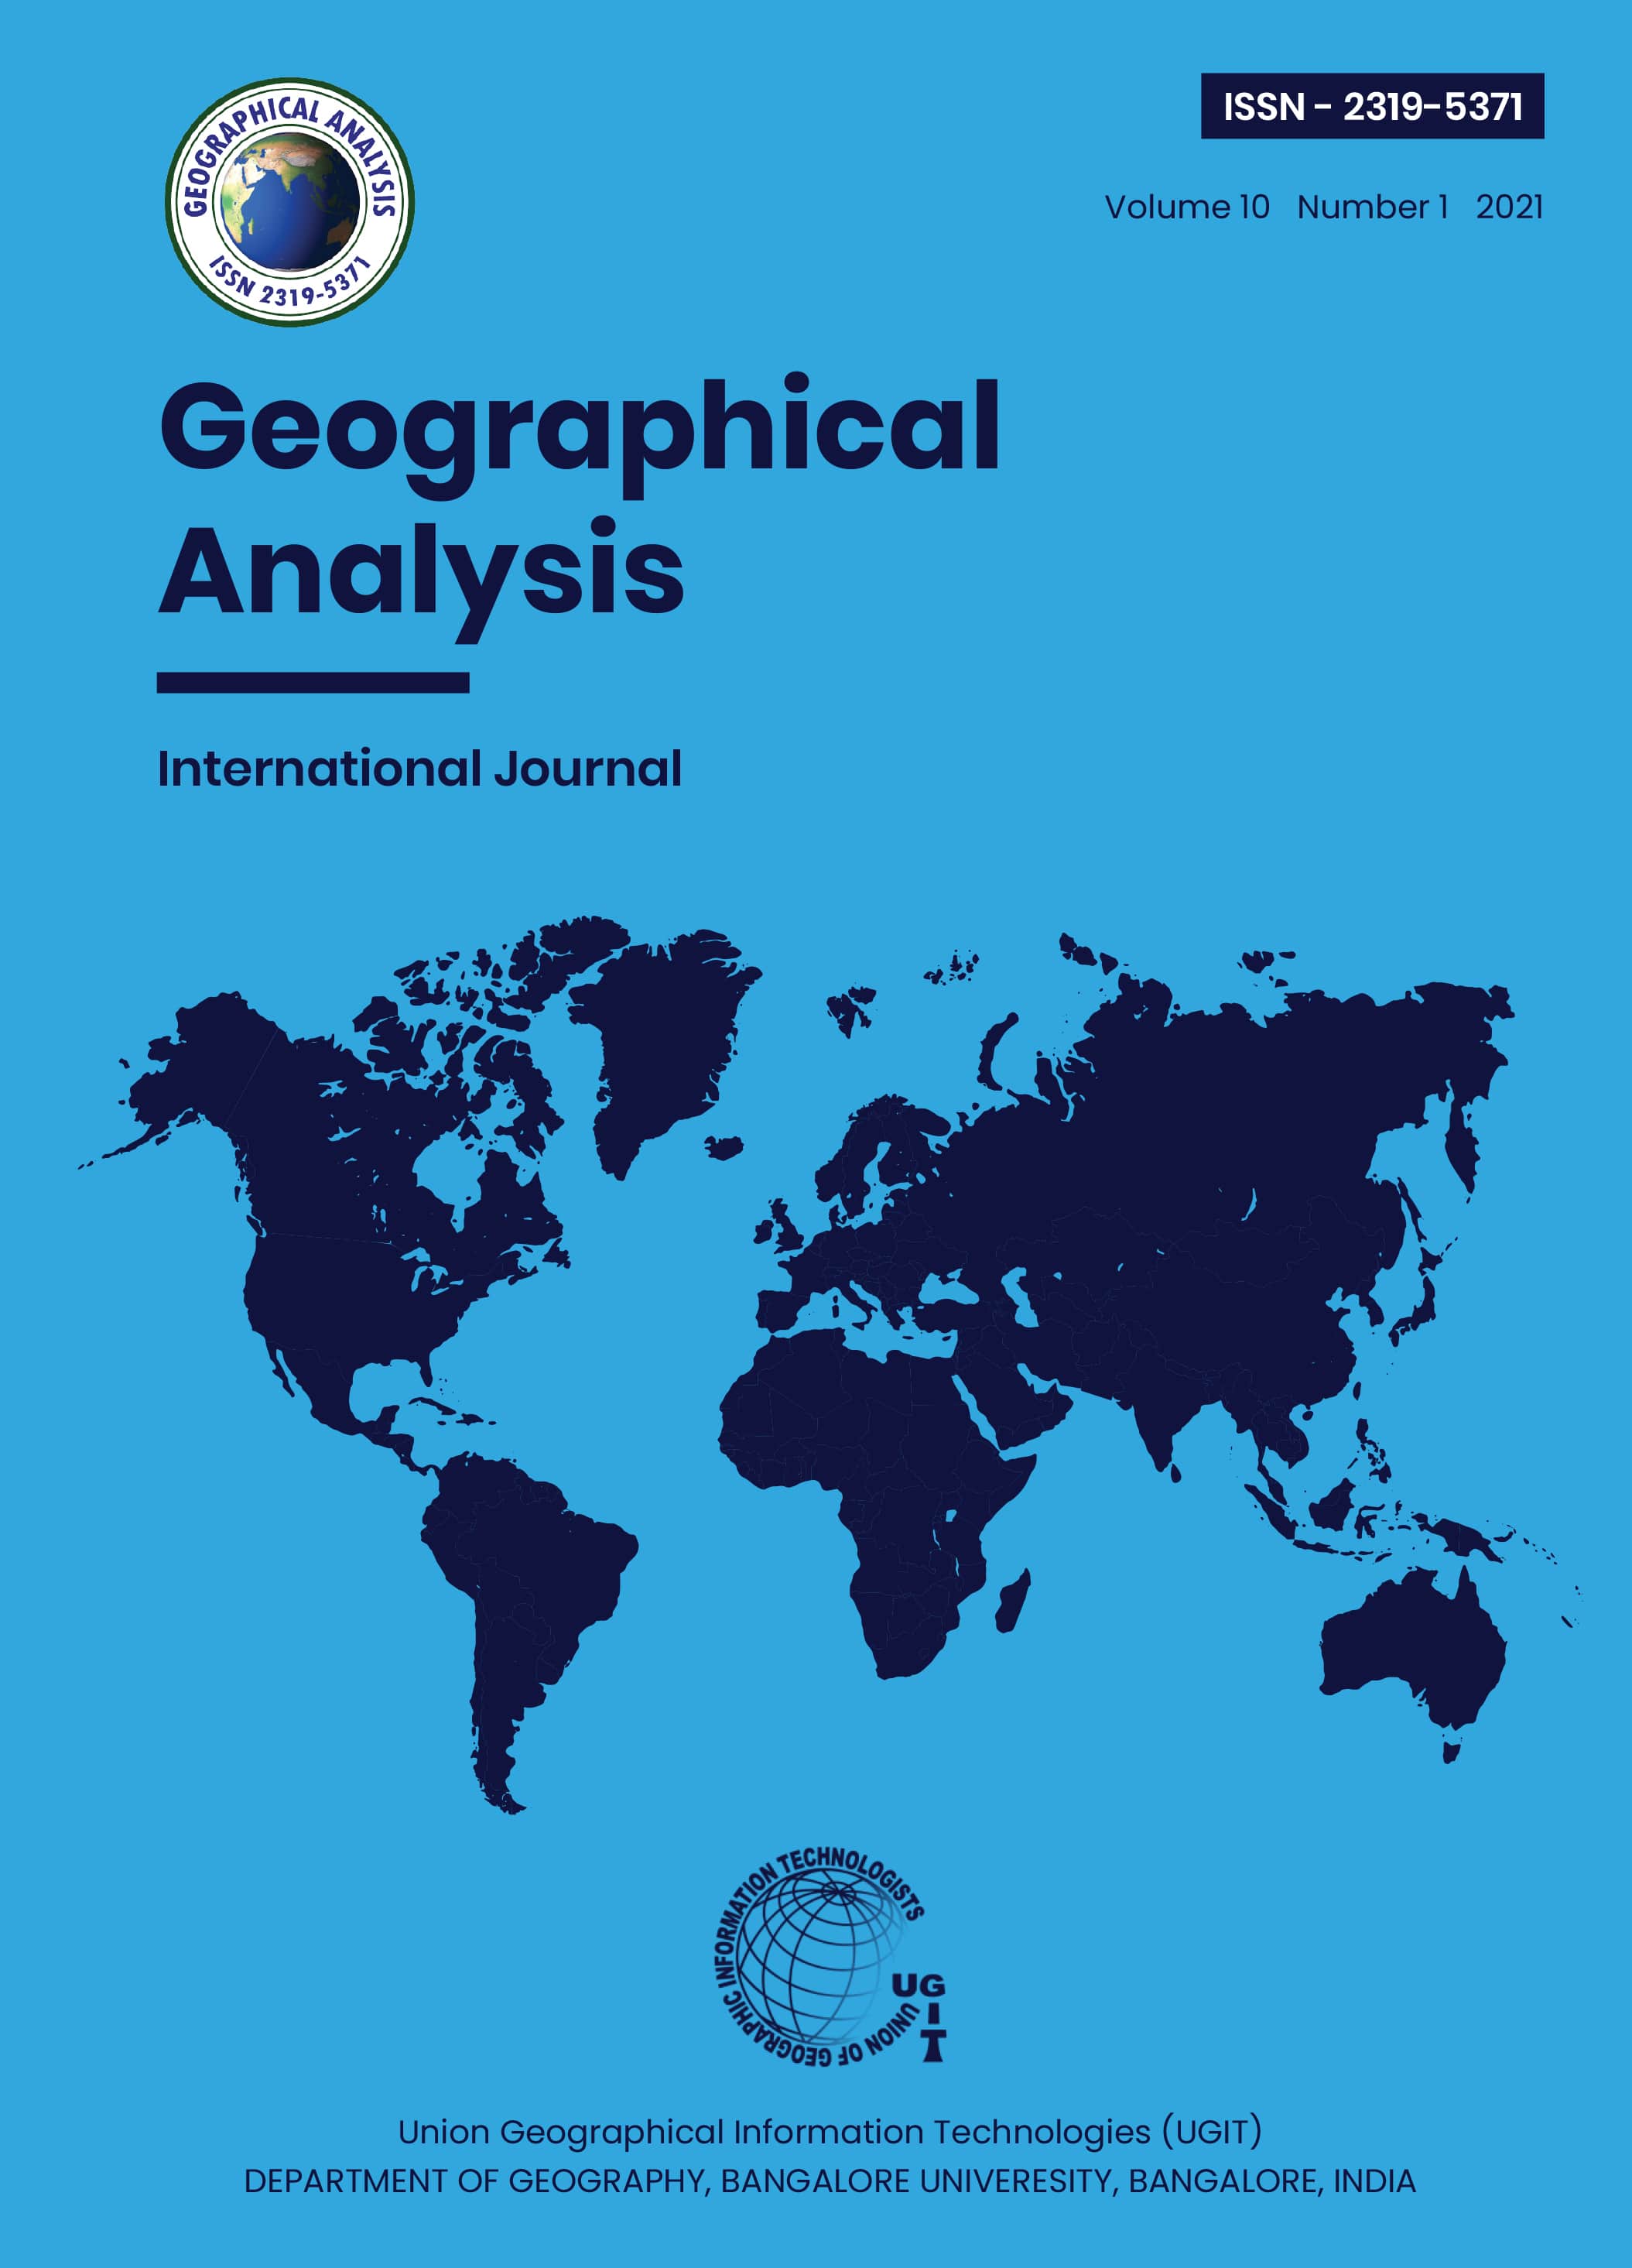 Geographical analysis